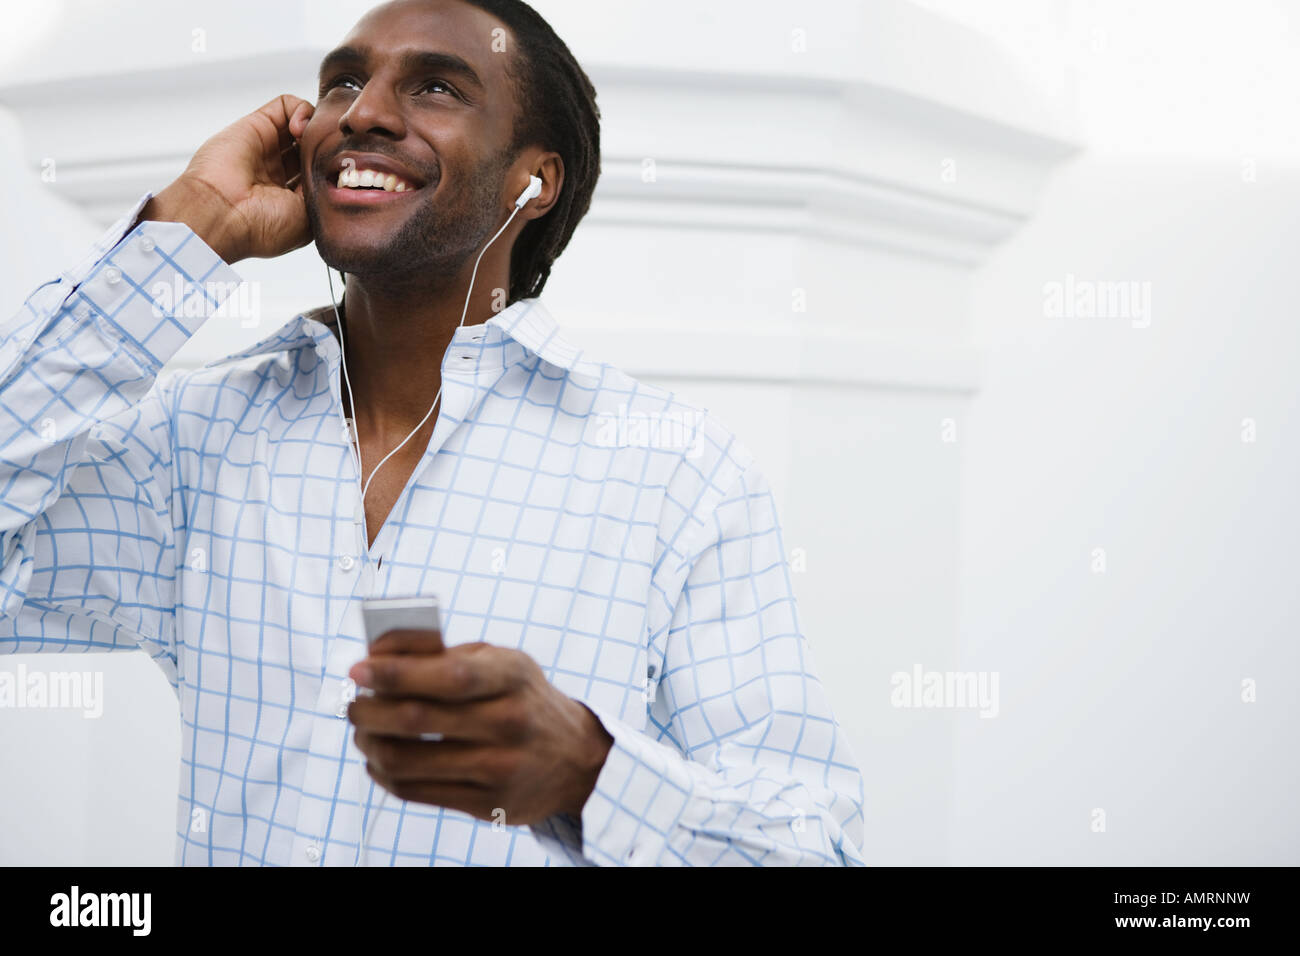 African man listening to mp3 player Banque D'Images